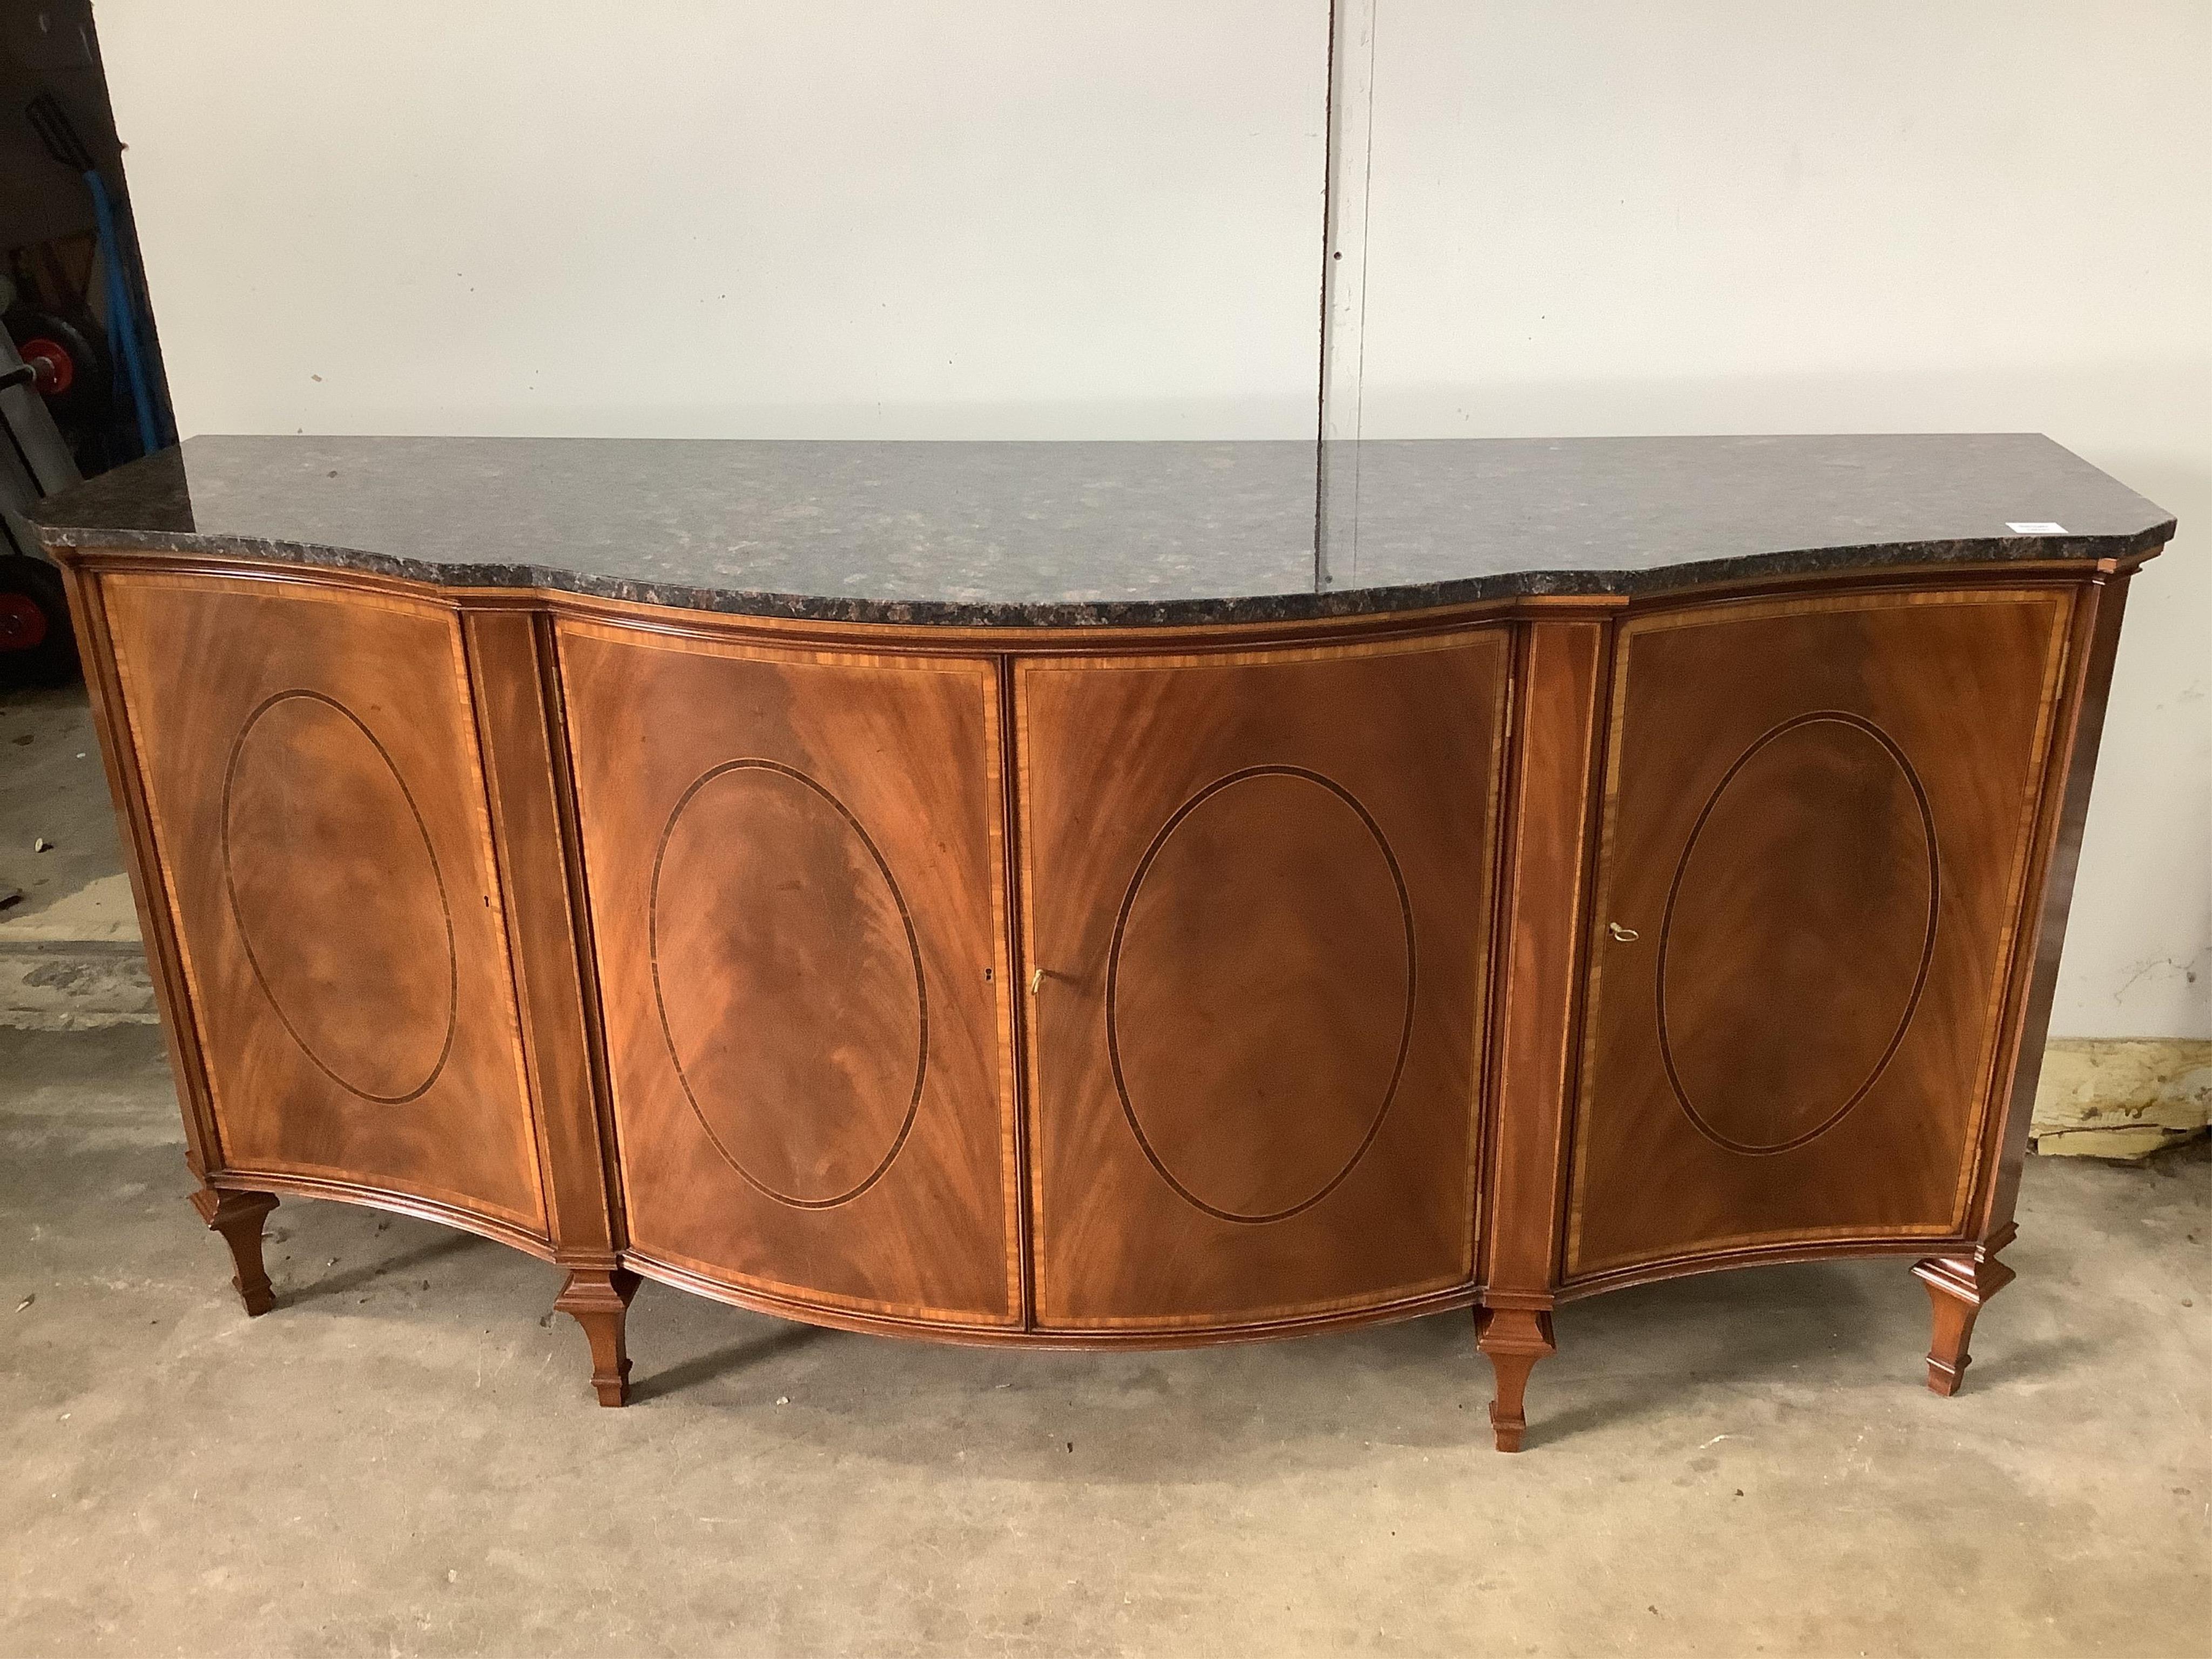 A reproduction marble top serpentine mahogany sideboard, width 181cm, depth 60cm, height 90cm. Condition - good